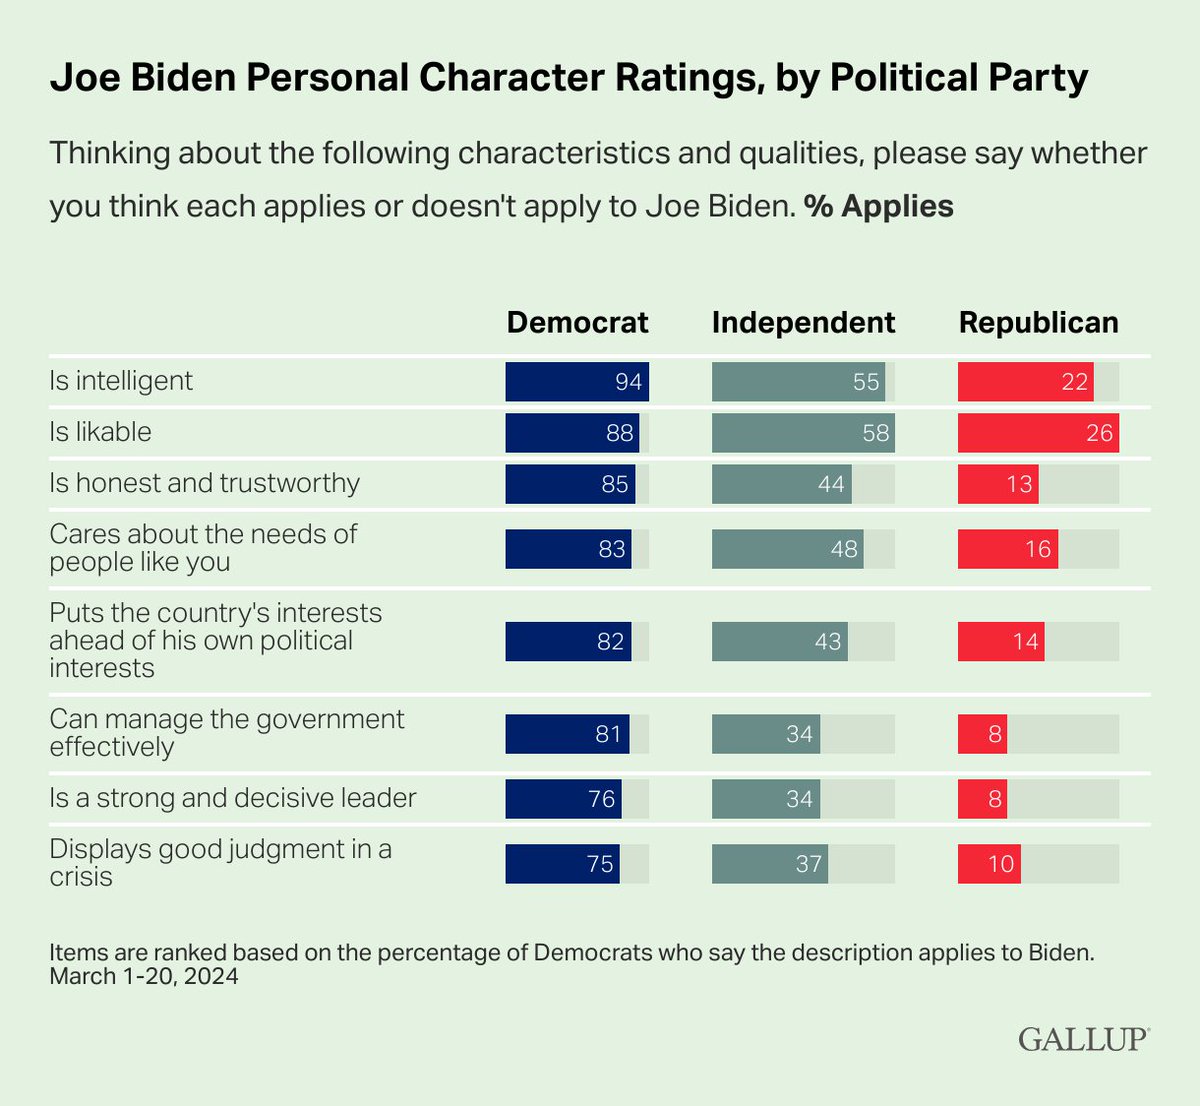 Intelligence and likability top Biden's rankings for characteristics and qualities among all party groups.